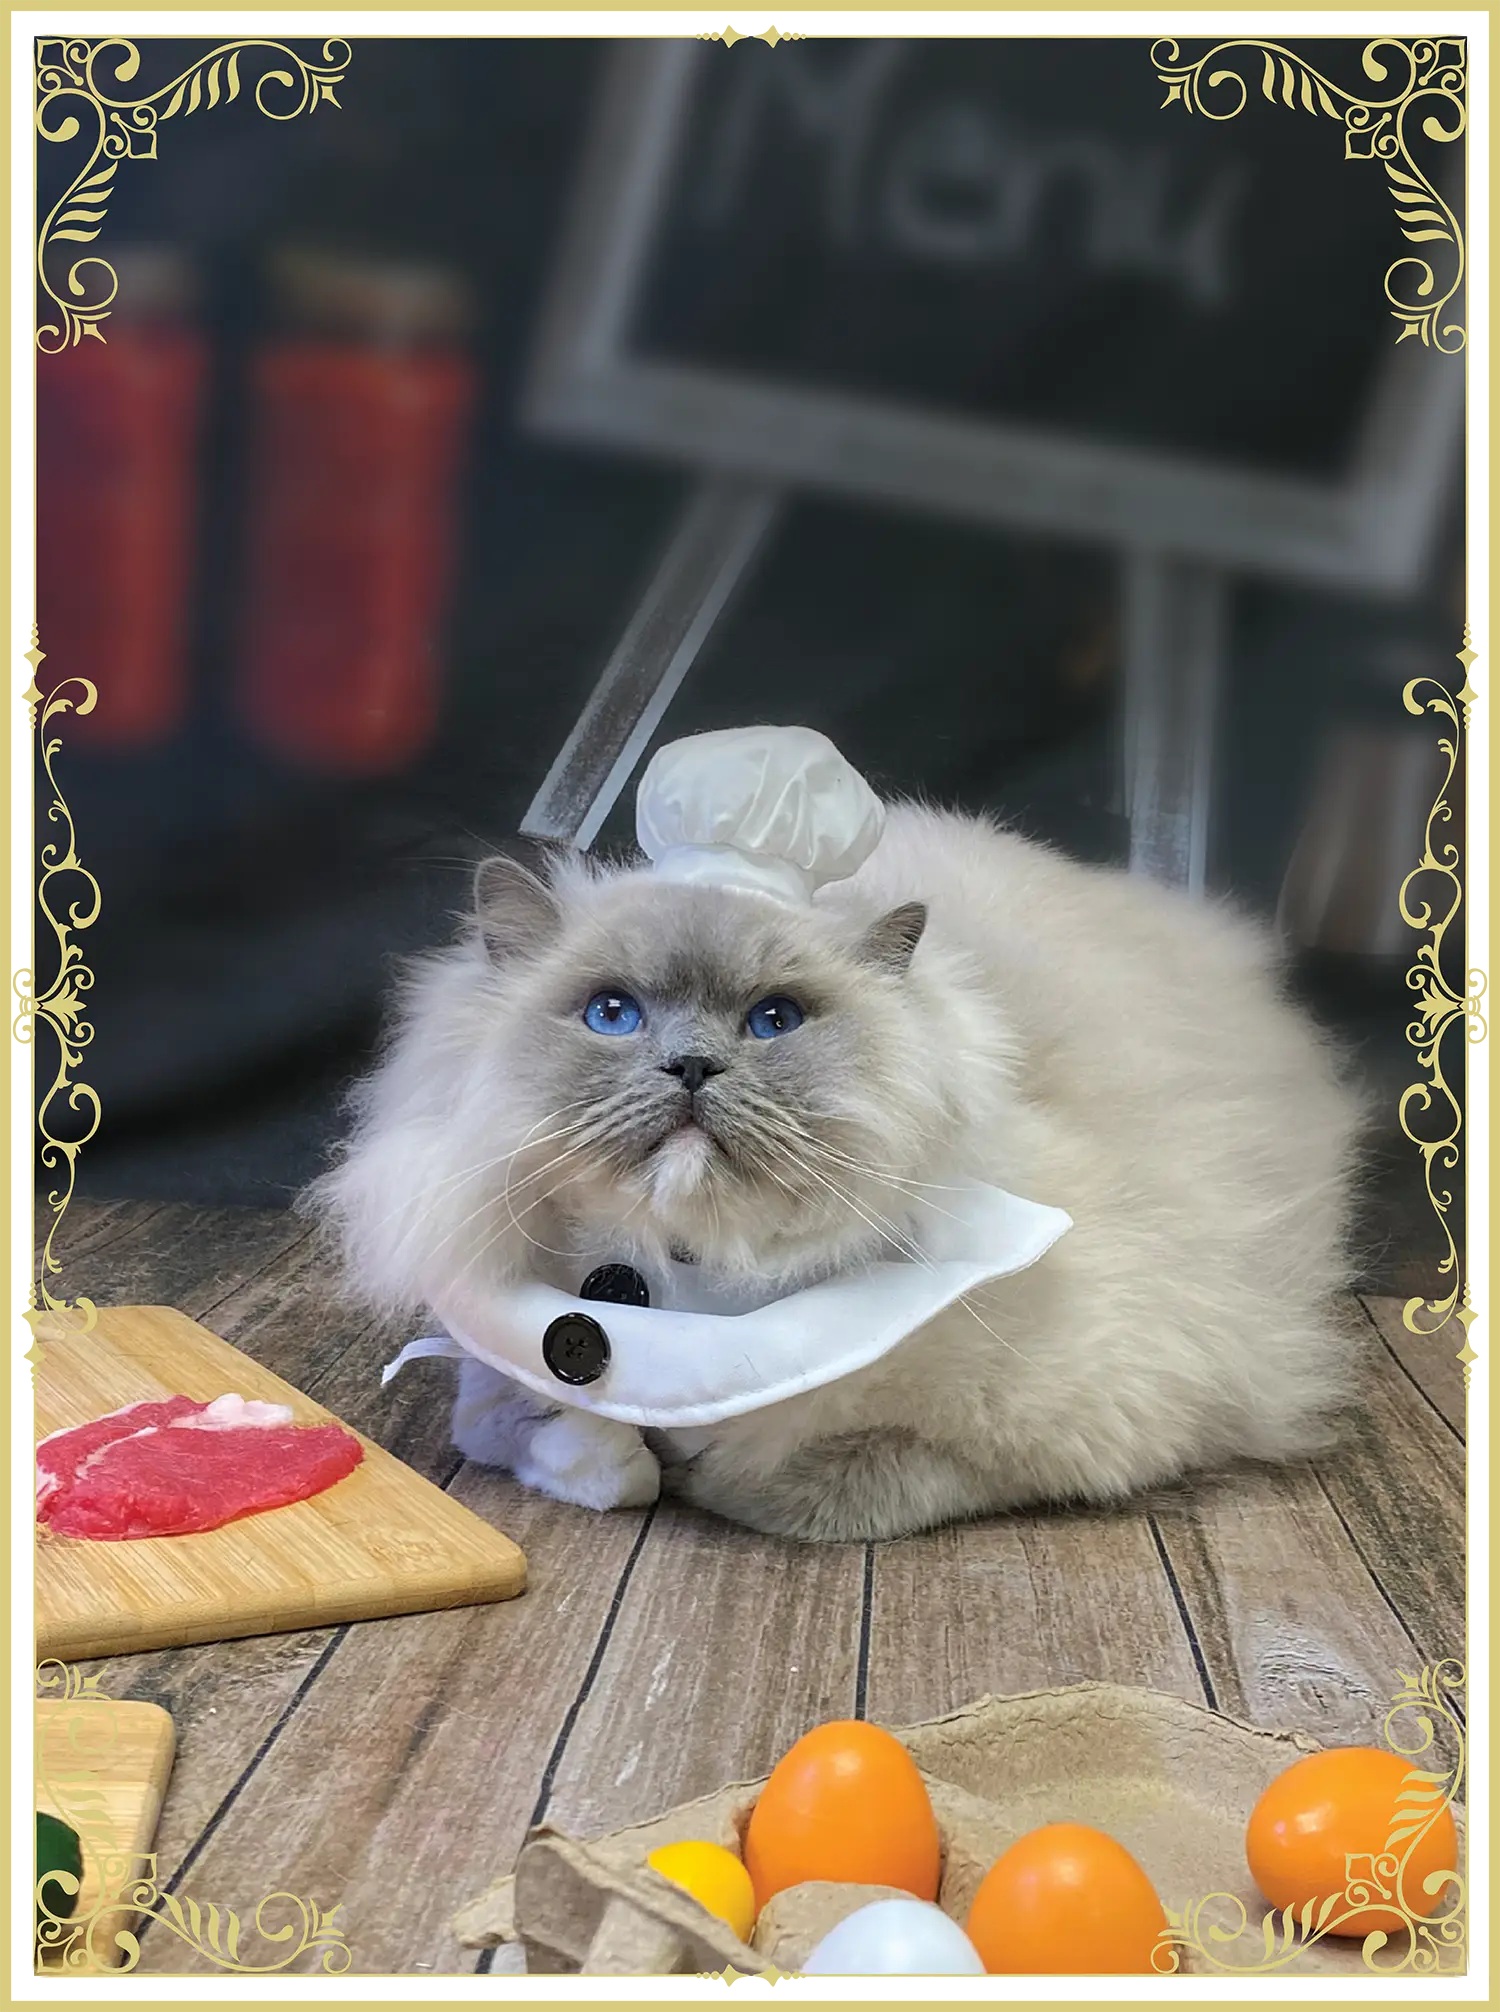 Augustus the cat dressed as a chef